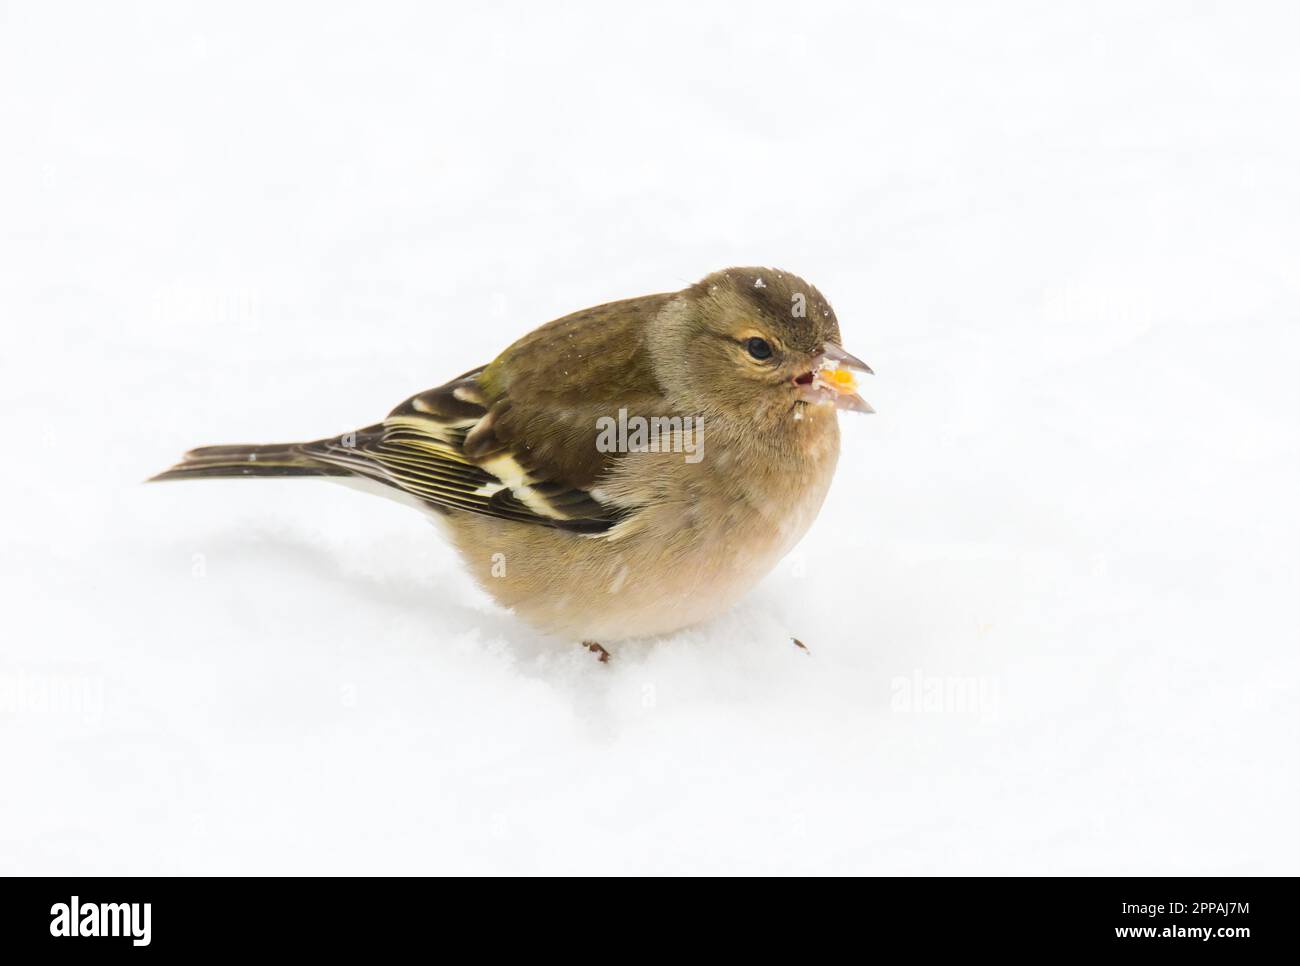 Female chaffinch bird standing in the snow Stock Photo